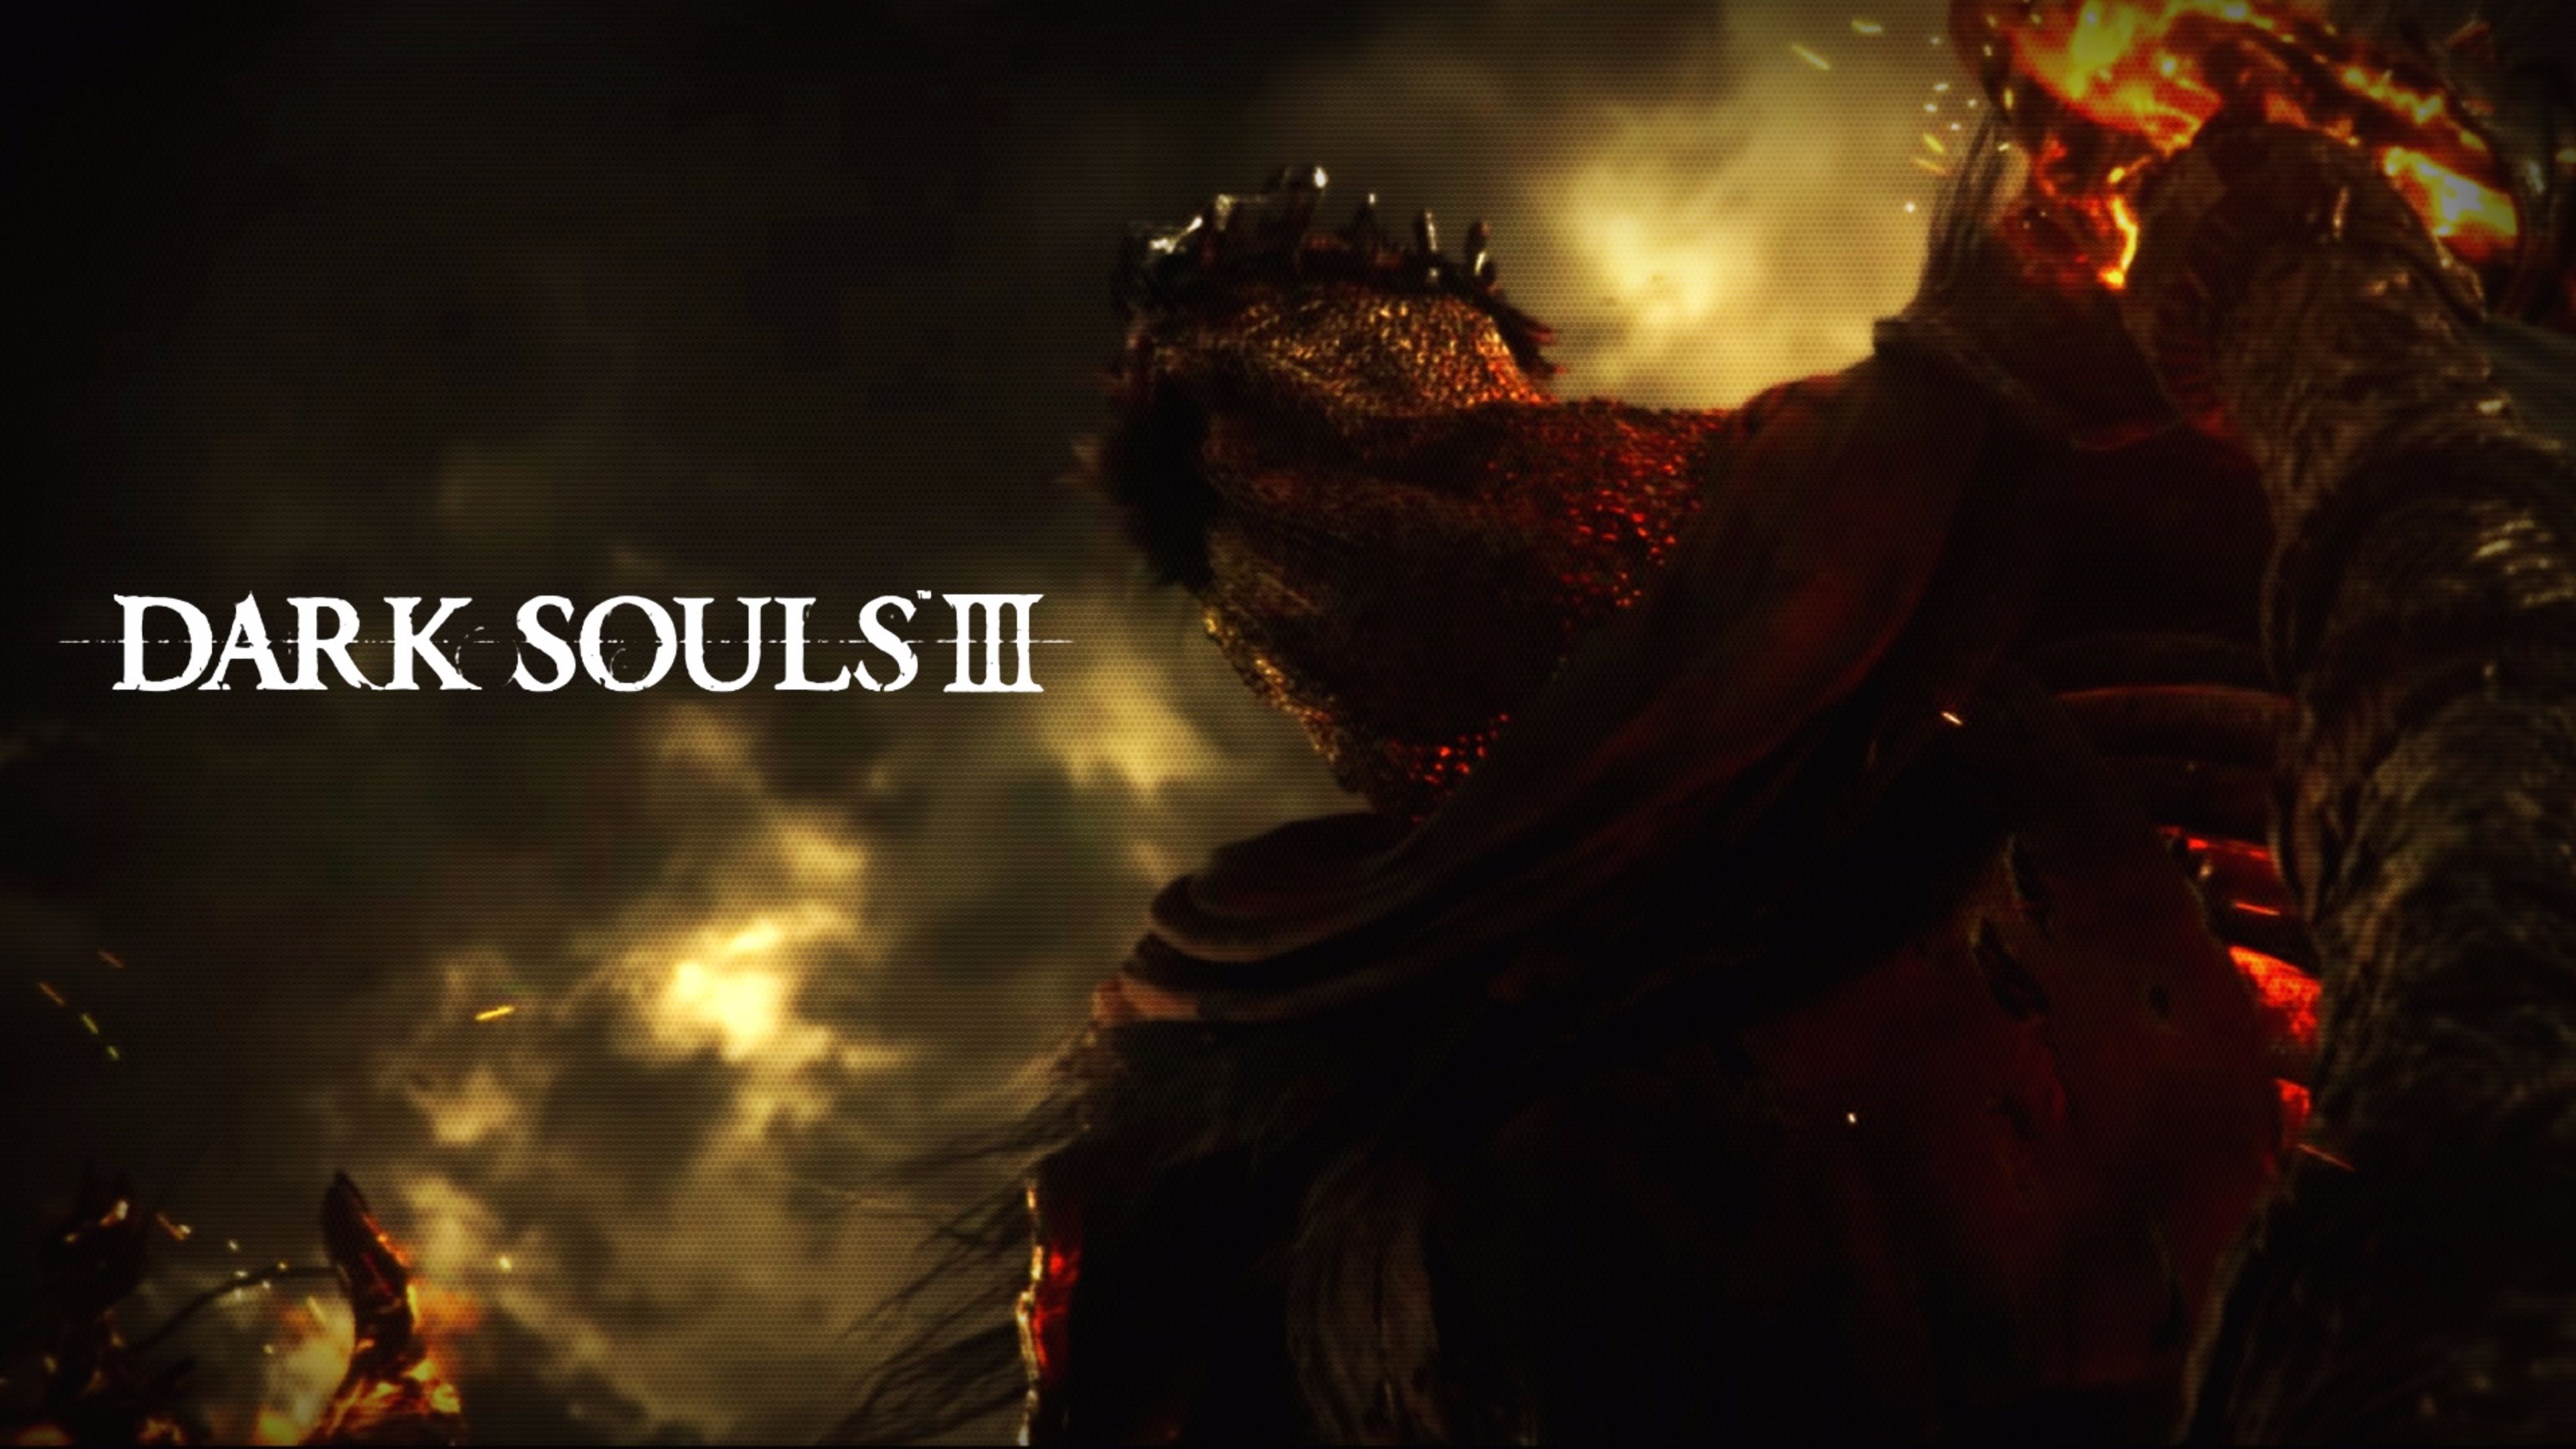 Dark Souls 3 Wallpapers, Pictures, Images